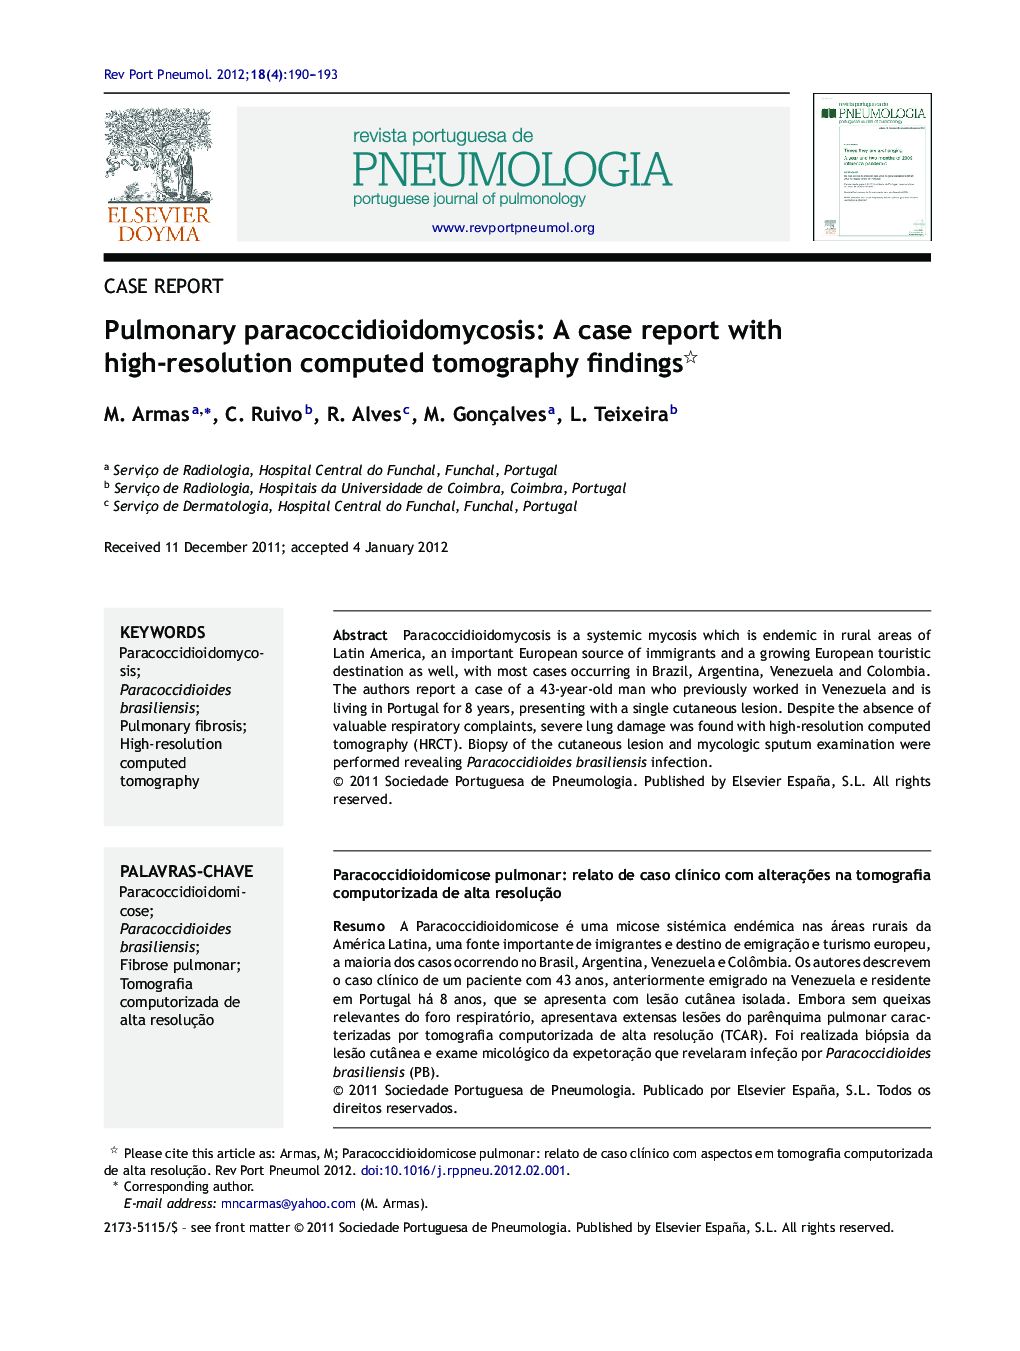 Pulmonary paracoccidioidomycosis: A case report with high-resolution computed tomography findings 